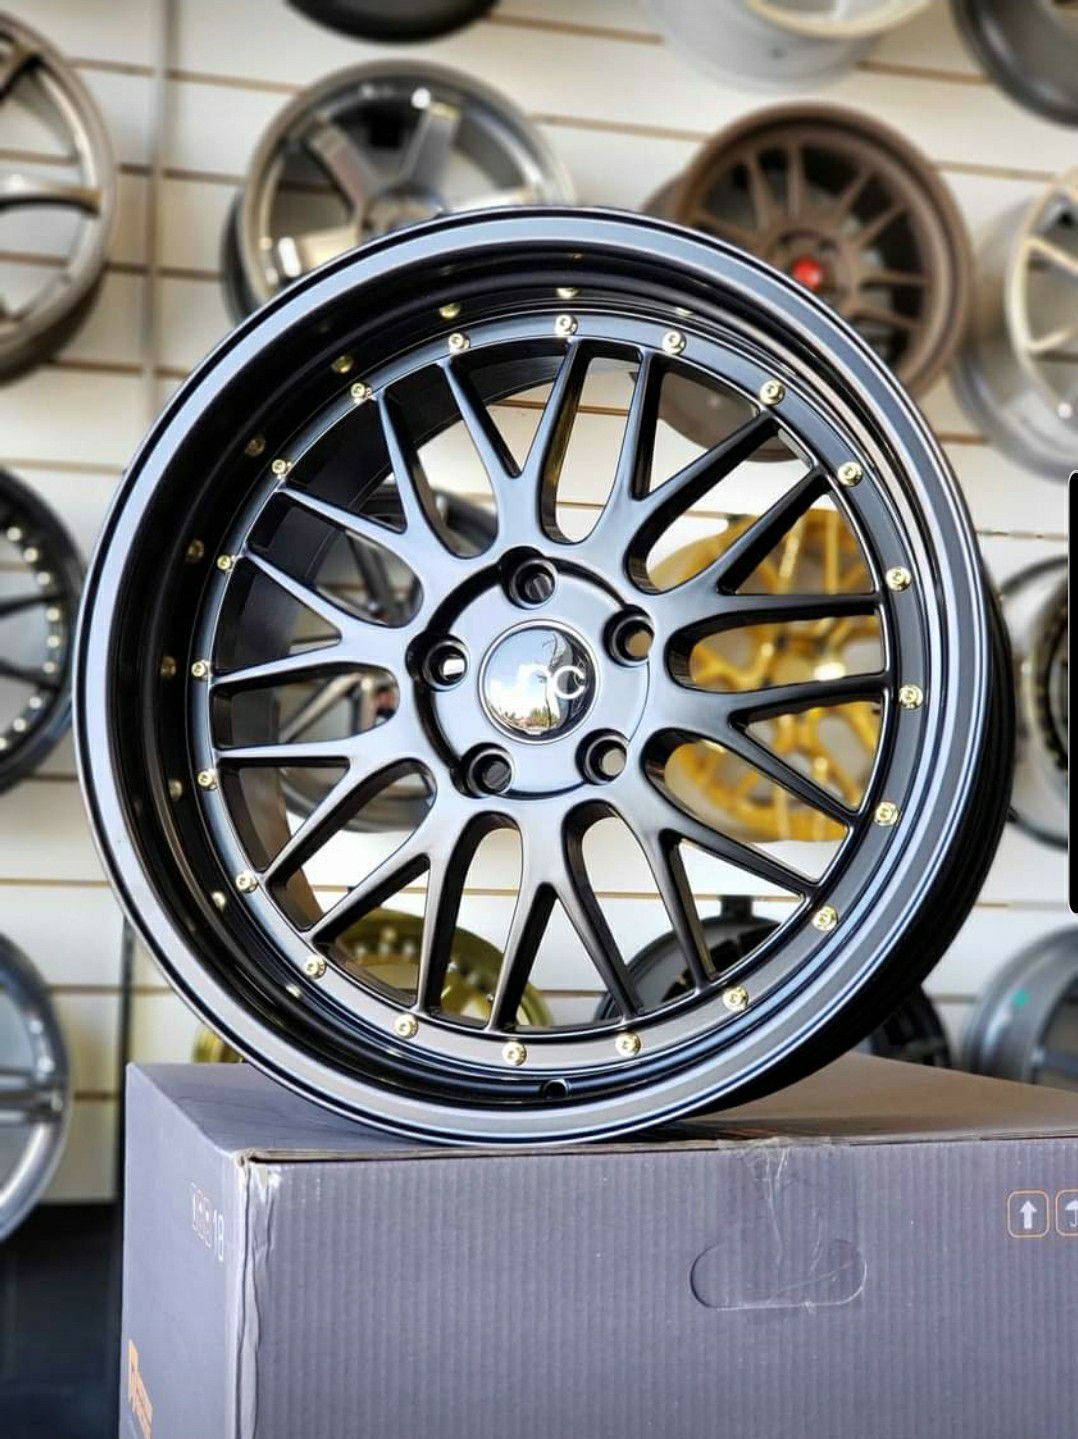 Jnc005 wheels. 18×9. 5×114.3. +34. FINANCING available. No credit check. $50 down only. Apply 4 free